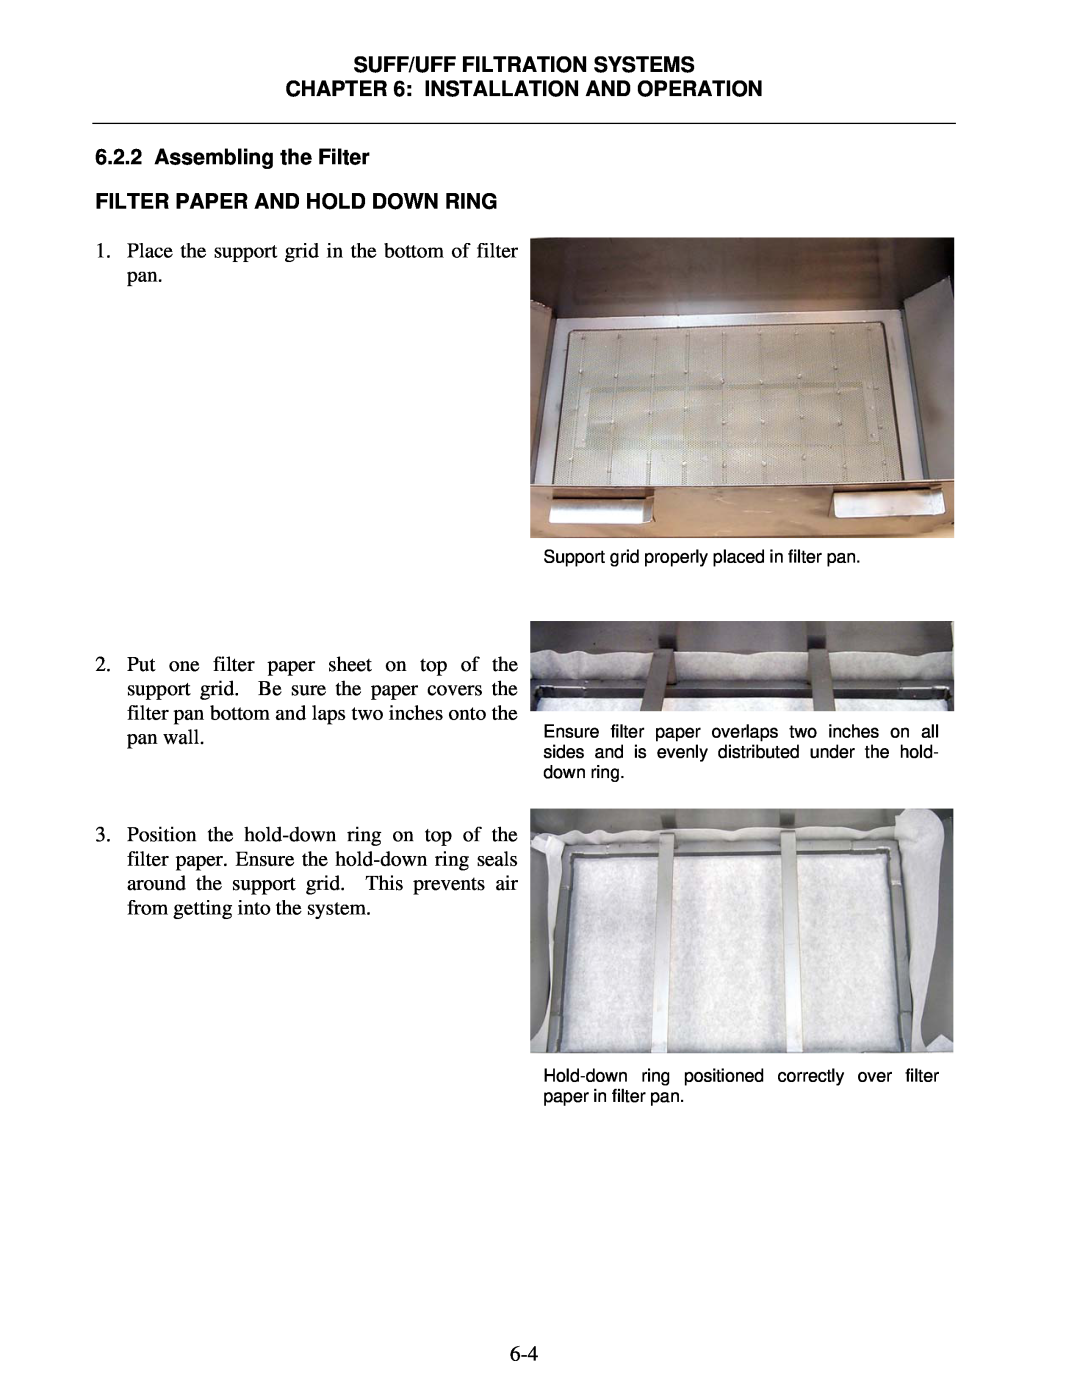 Frymaster FPHD65 operation manual Assembling the Filter, Suff/Uff Filtration Systems, Installation And Operation 